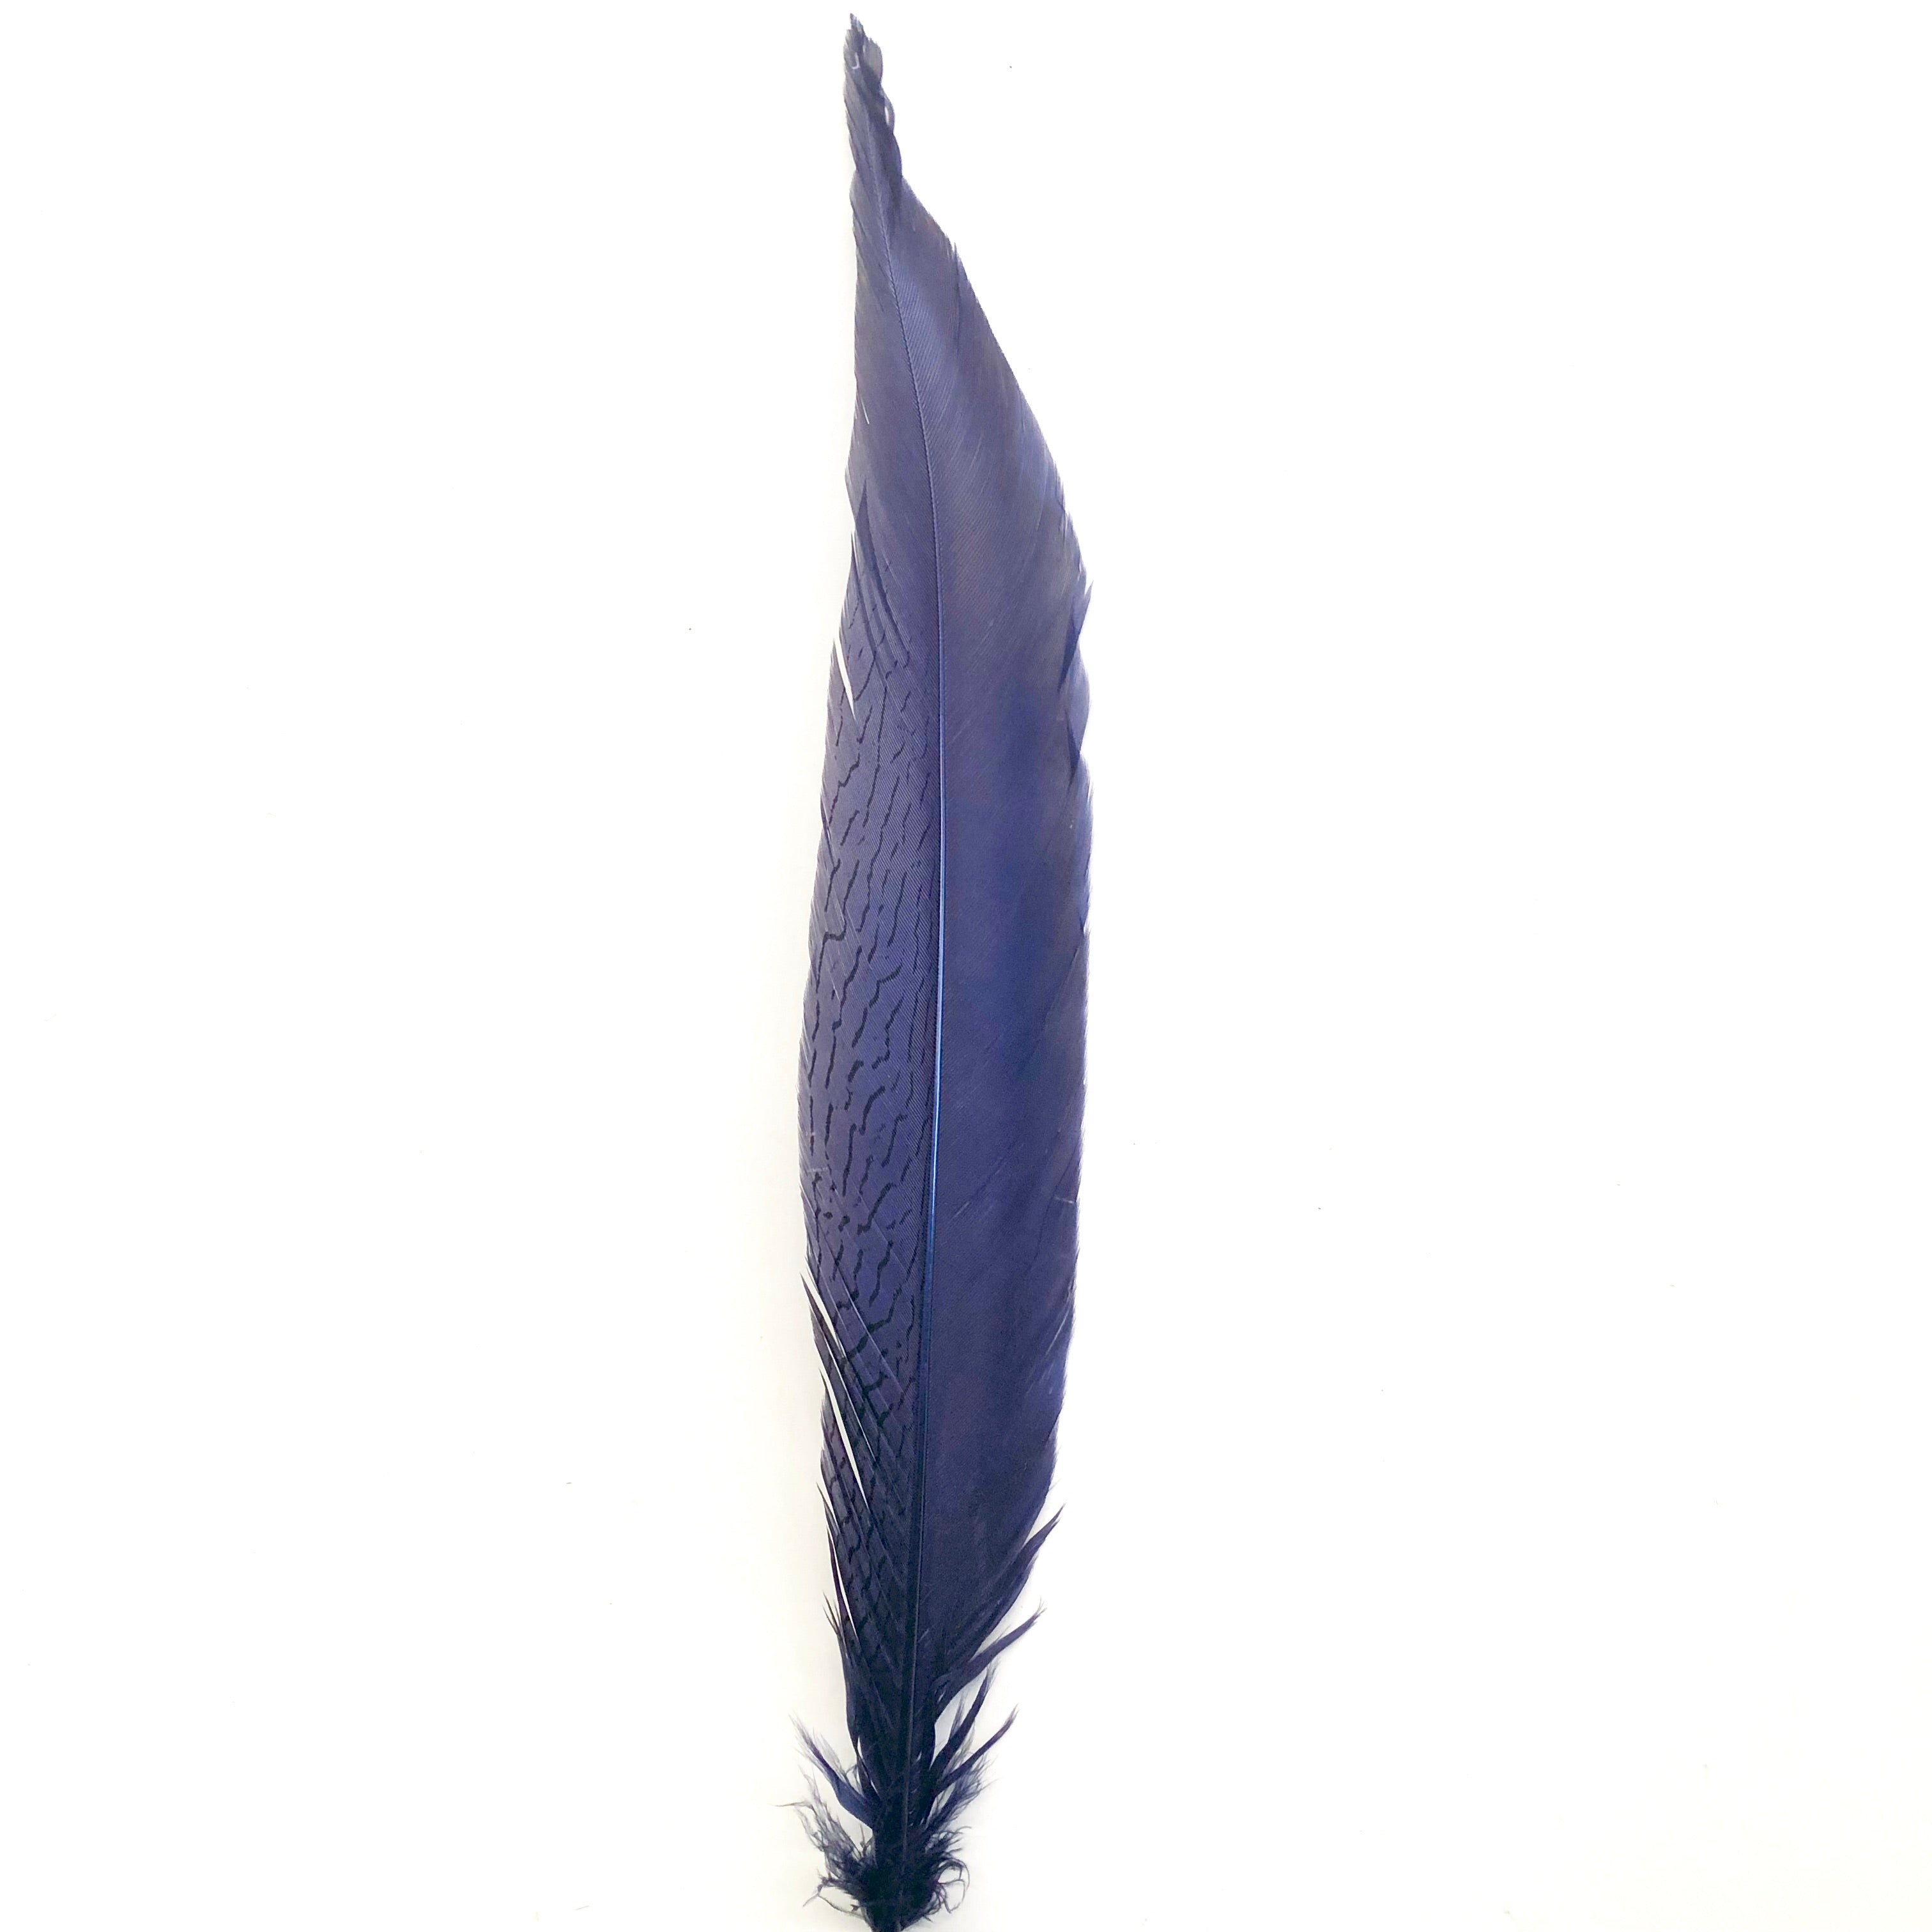 10" to 20" Silver Pheasant Tail Feather - Dusty Navy Blue